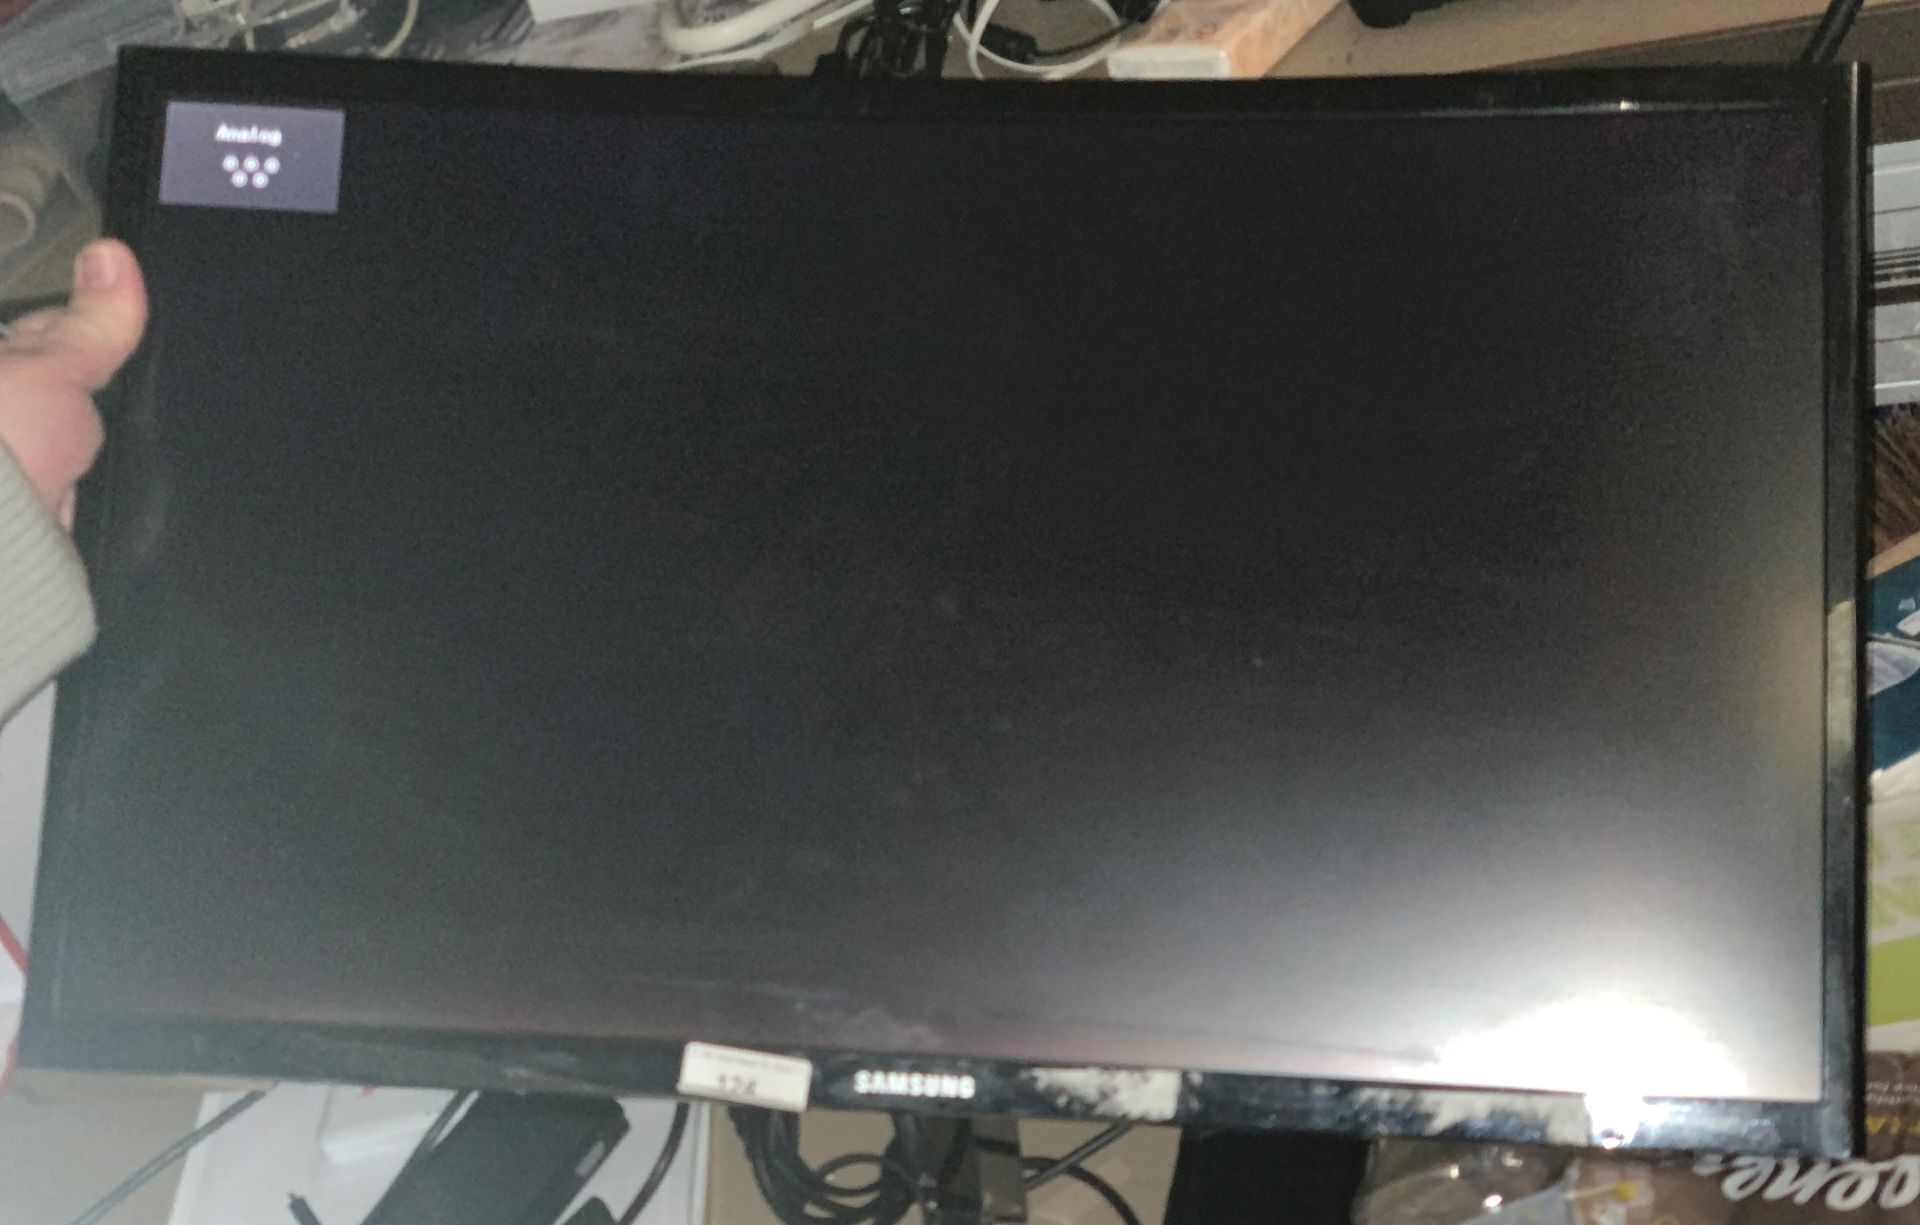 A Samsung 24" curved colour display unit model no: C24F396FHU (part stand missing) complete with - Image 4 of 4